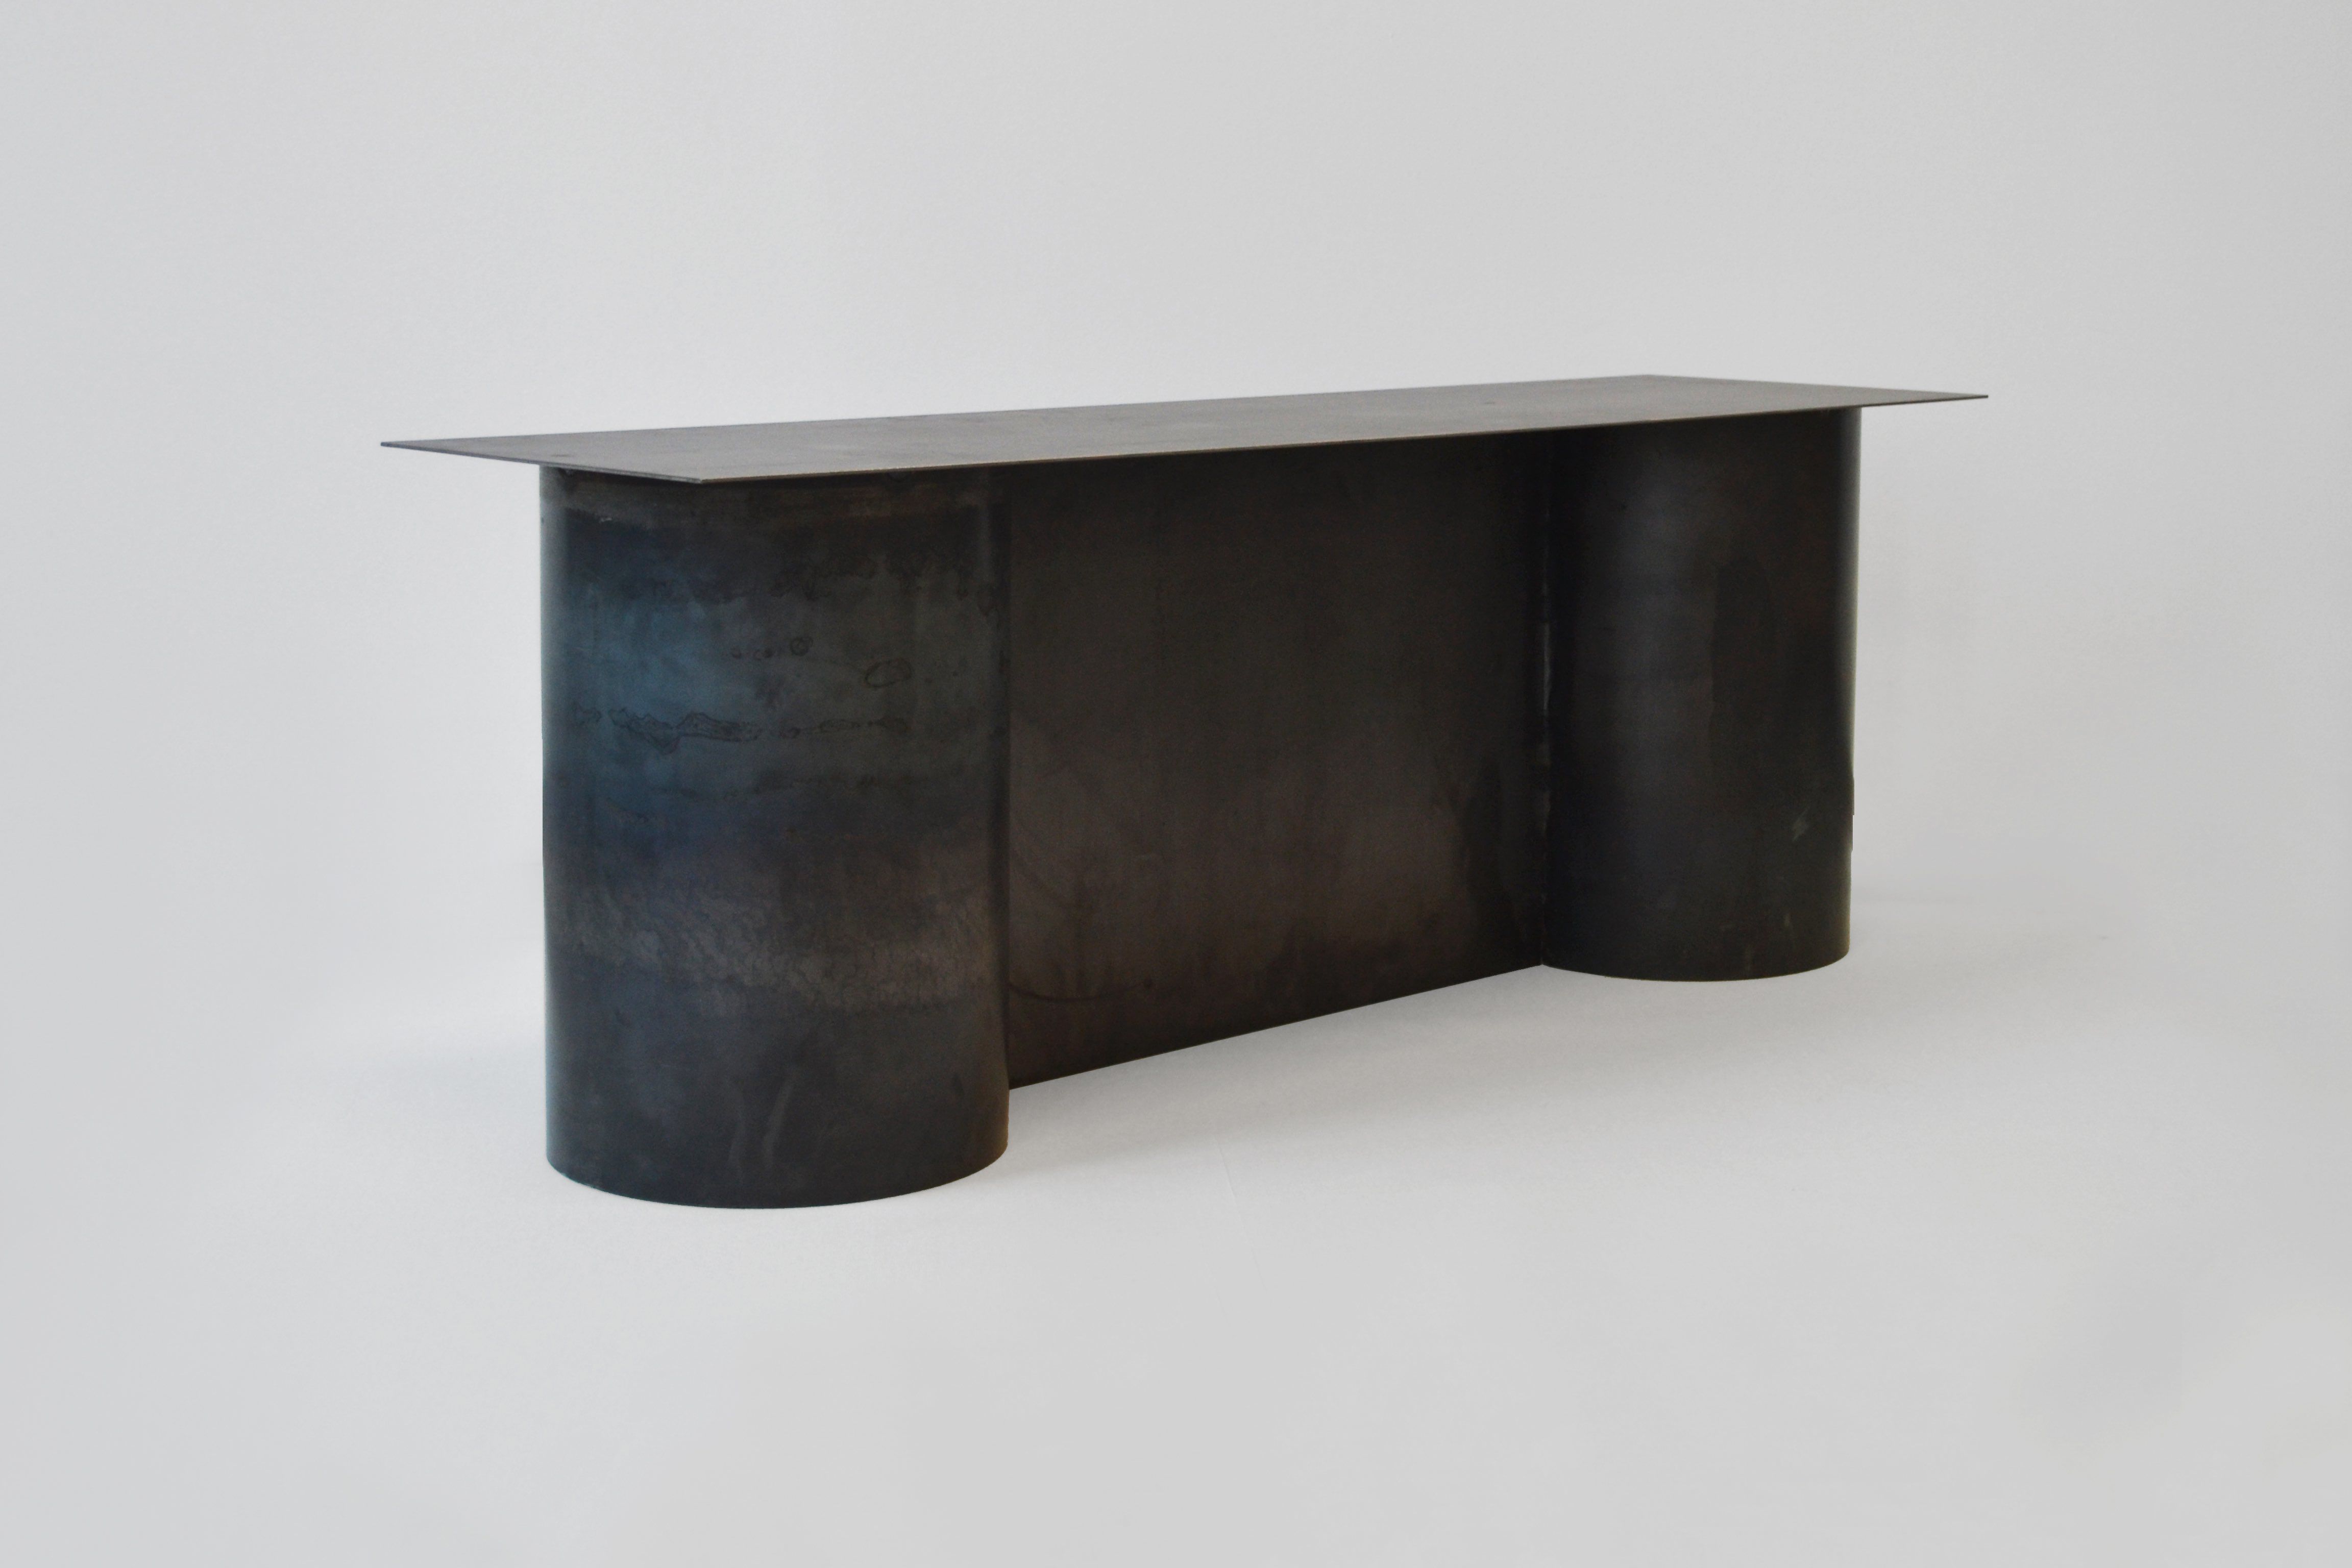 Bench Ferro Blue, part of personal collection, Ferro collection, 2019 by CARA/DAVIDE. Table. © CARA/DAVIDE